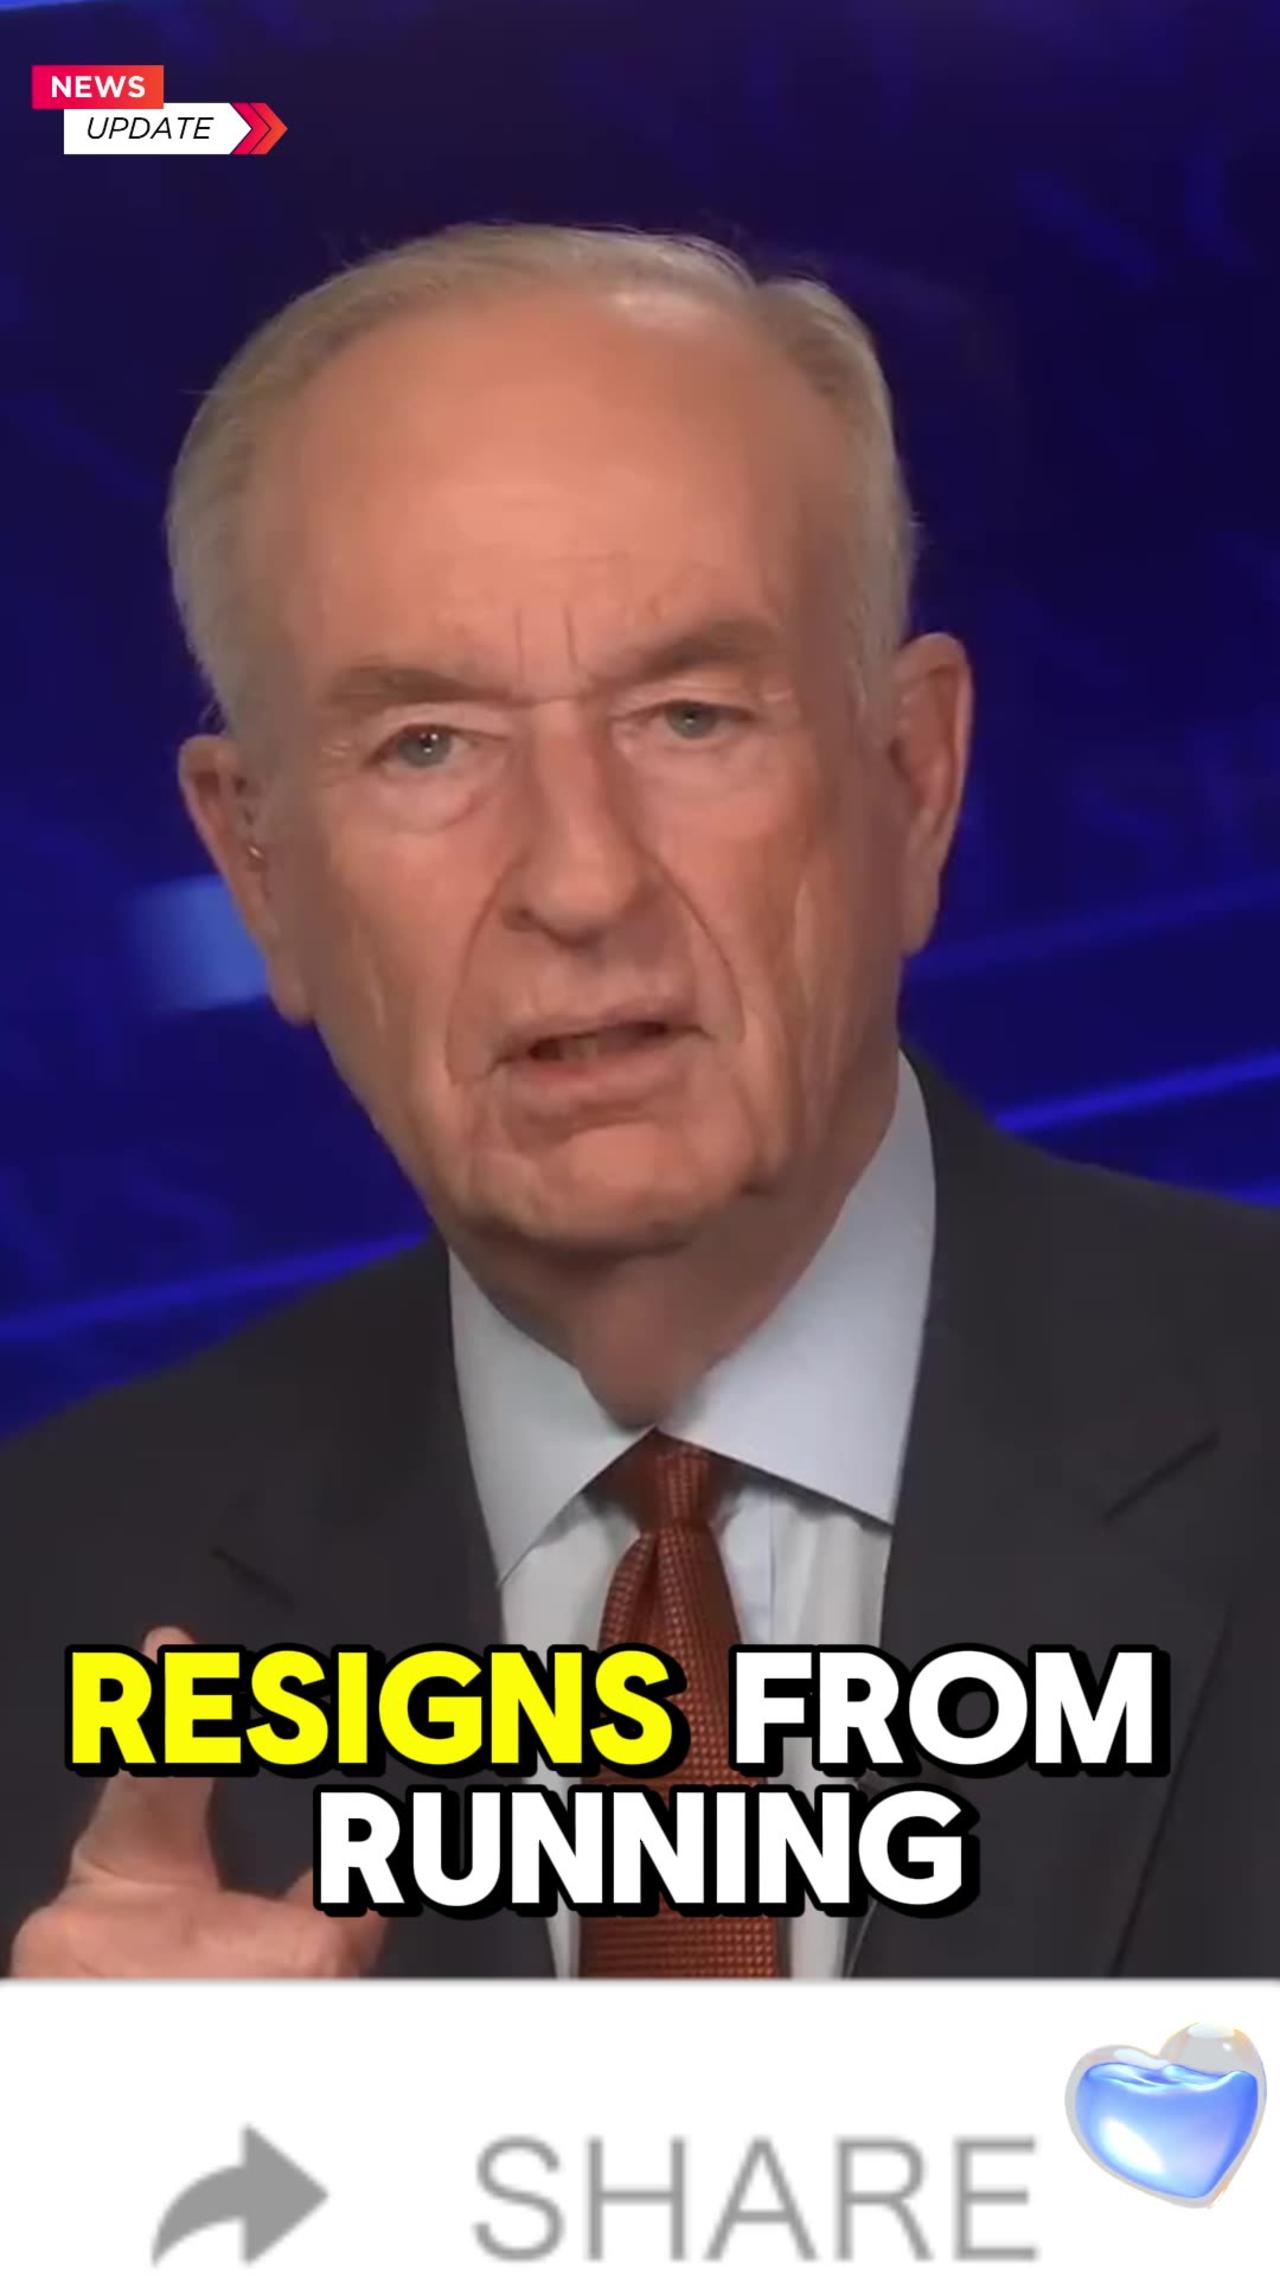 Pt 10 Bill O'Reilly on the historical situation the country is in. #news #trending #viral